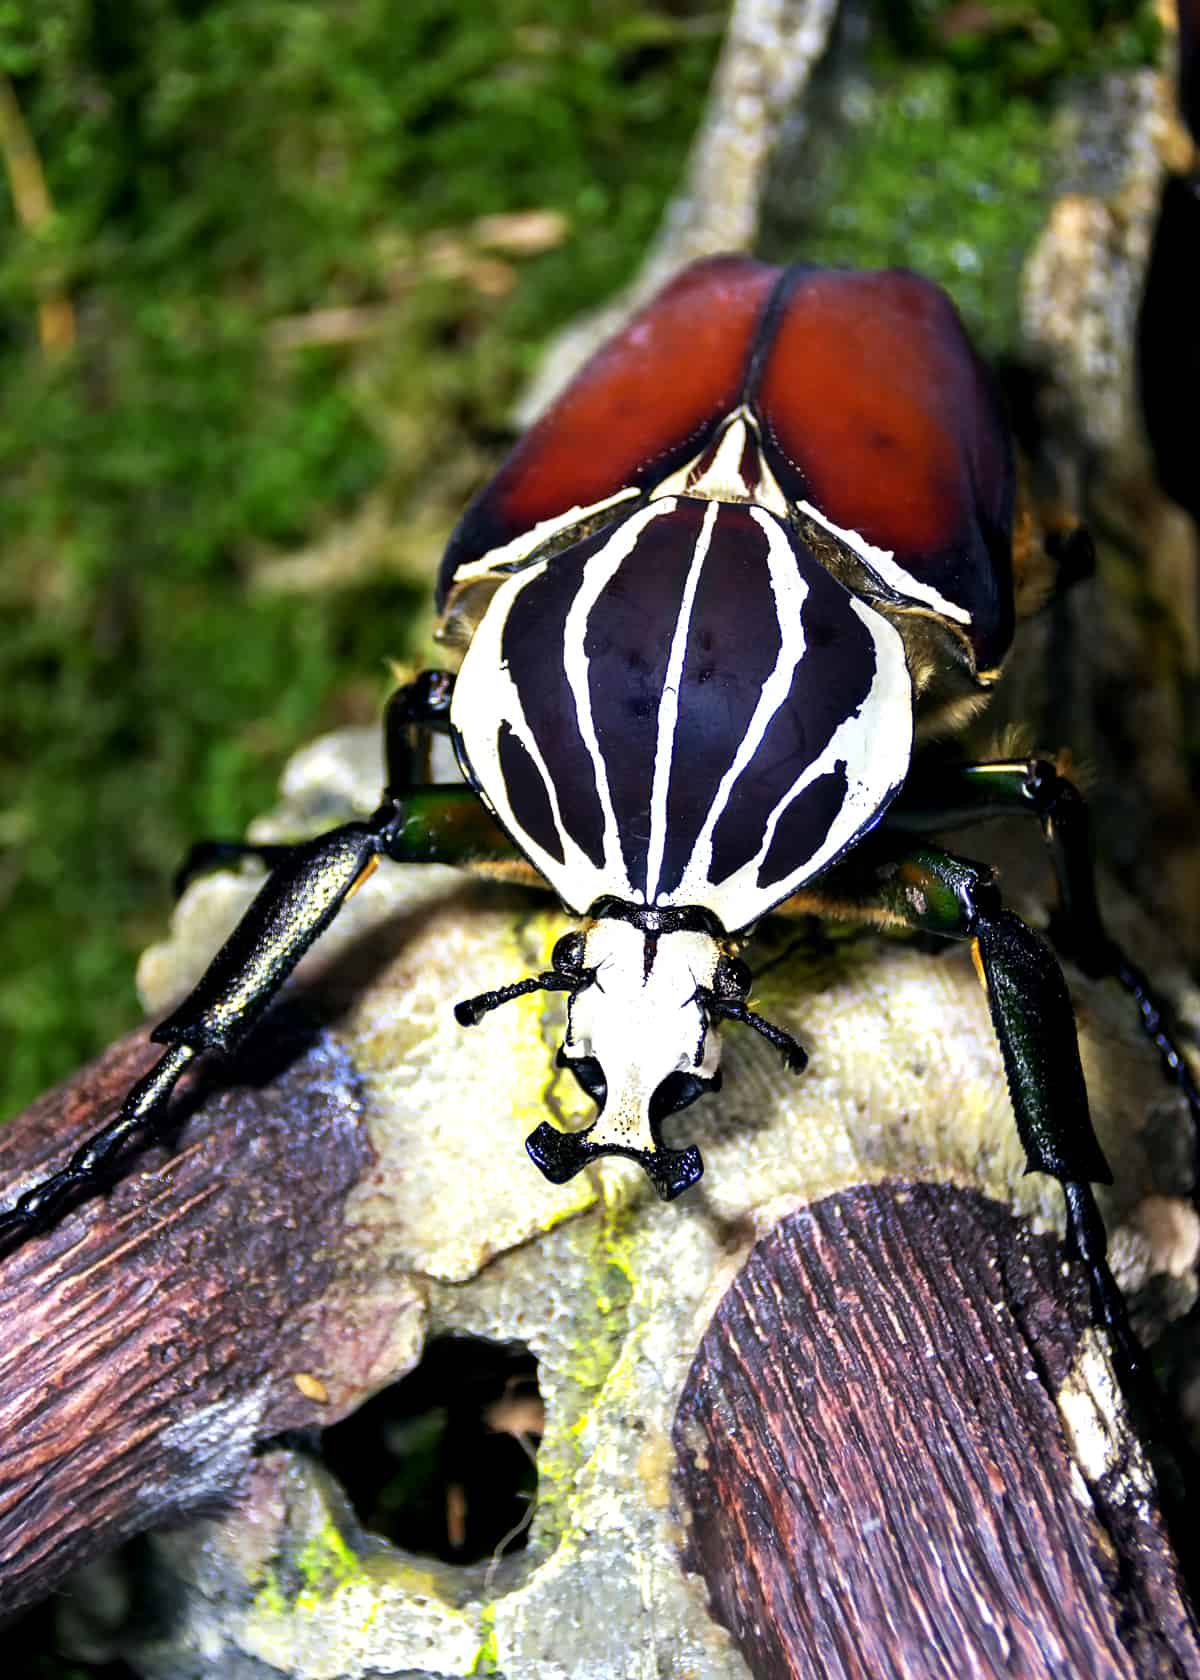 Facts about Goliath beetles